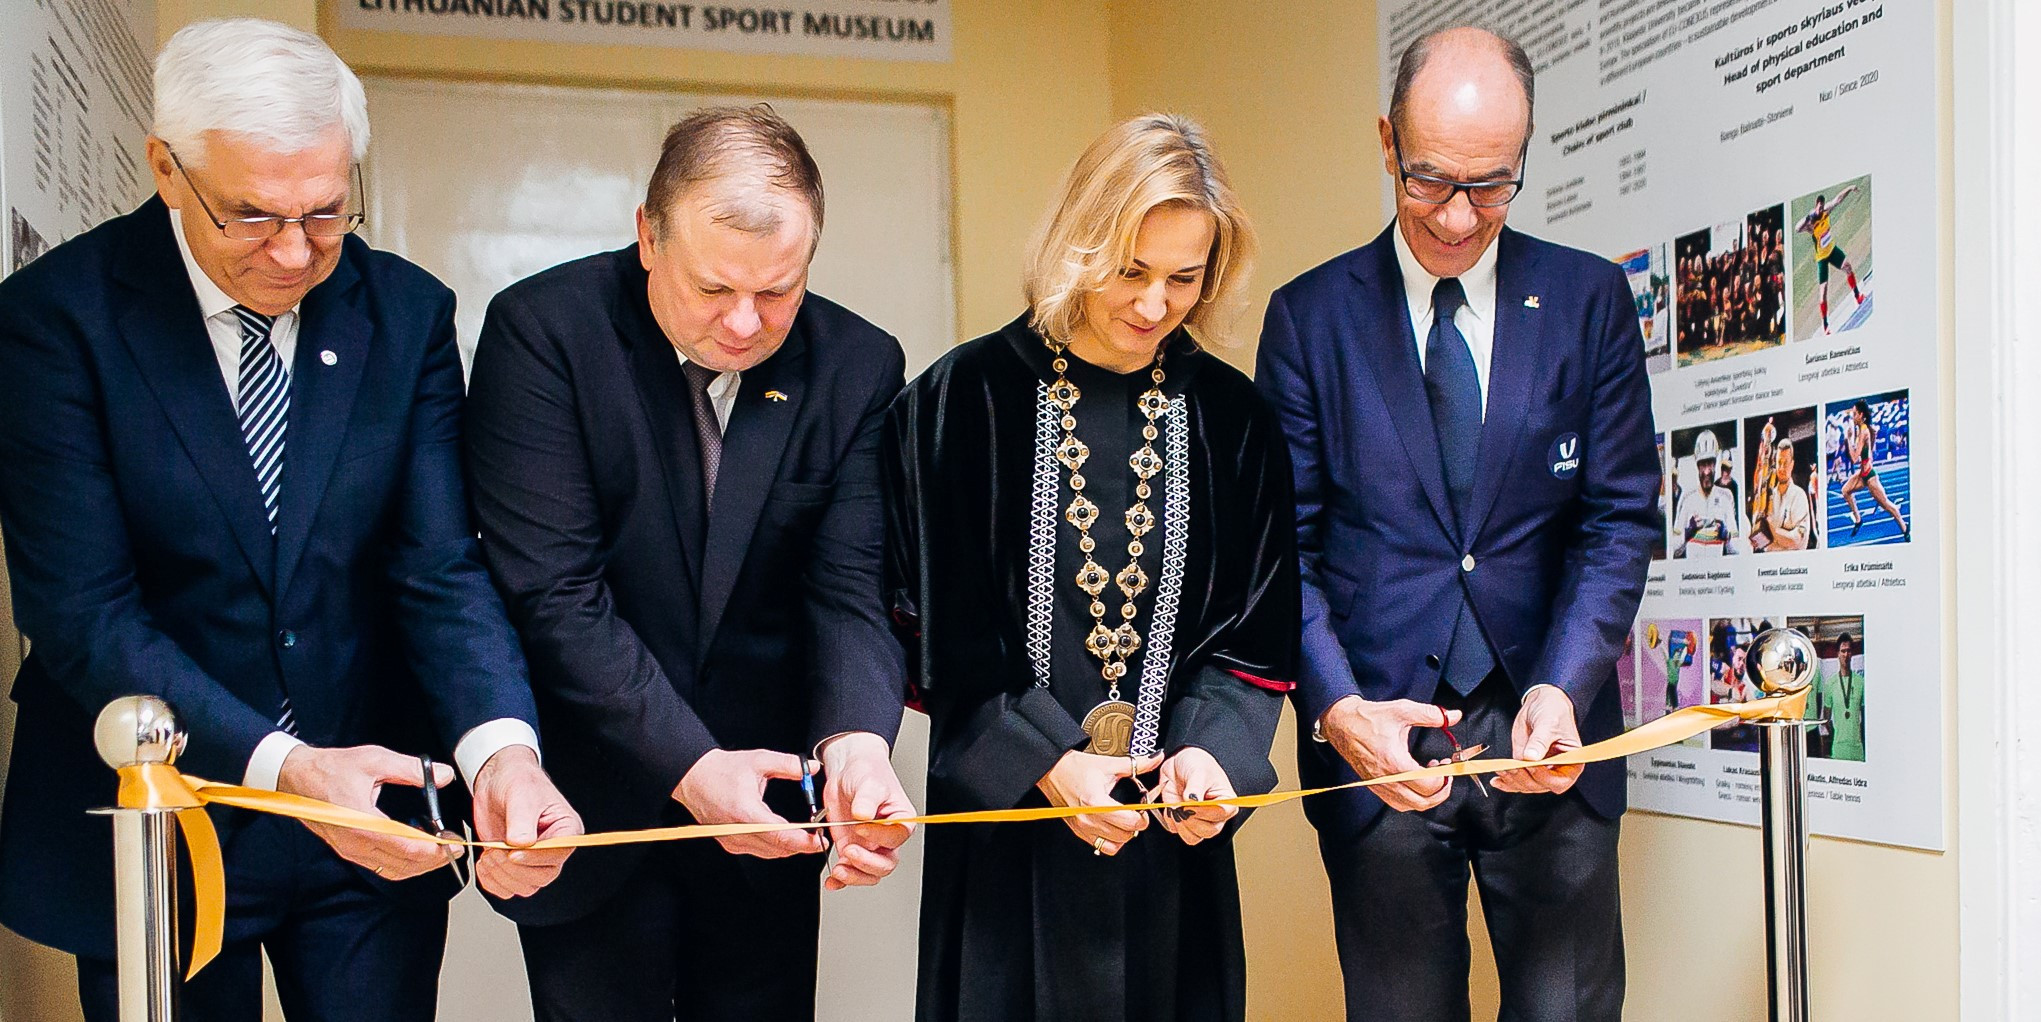 FISU leader opens Lithuanian National Students Sports Museum